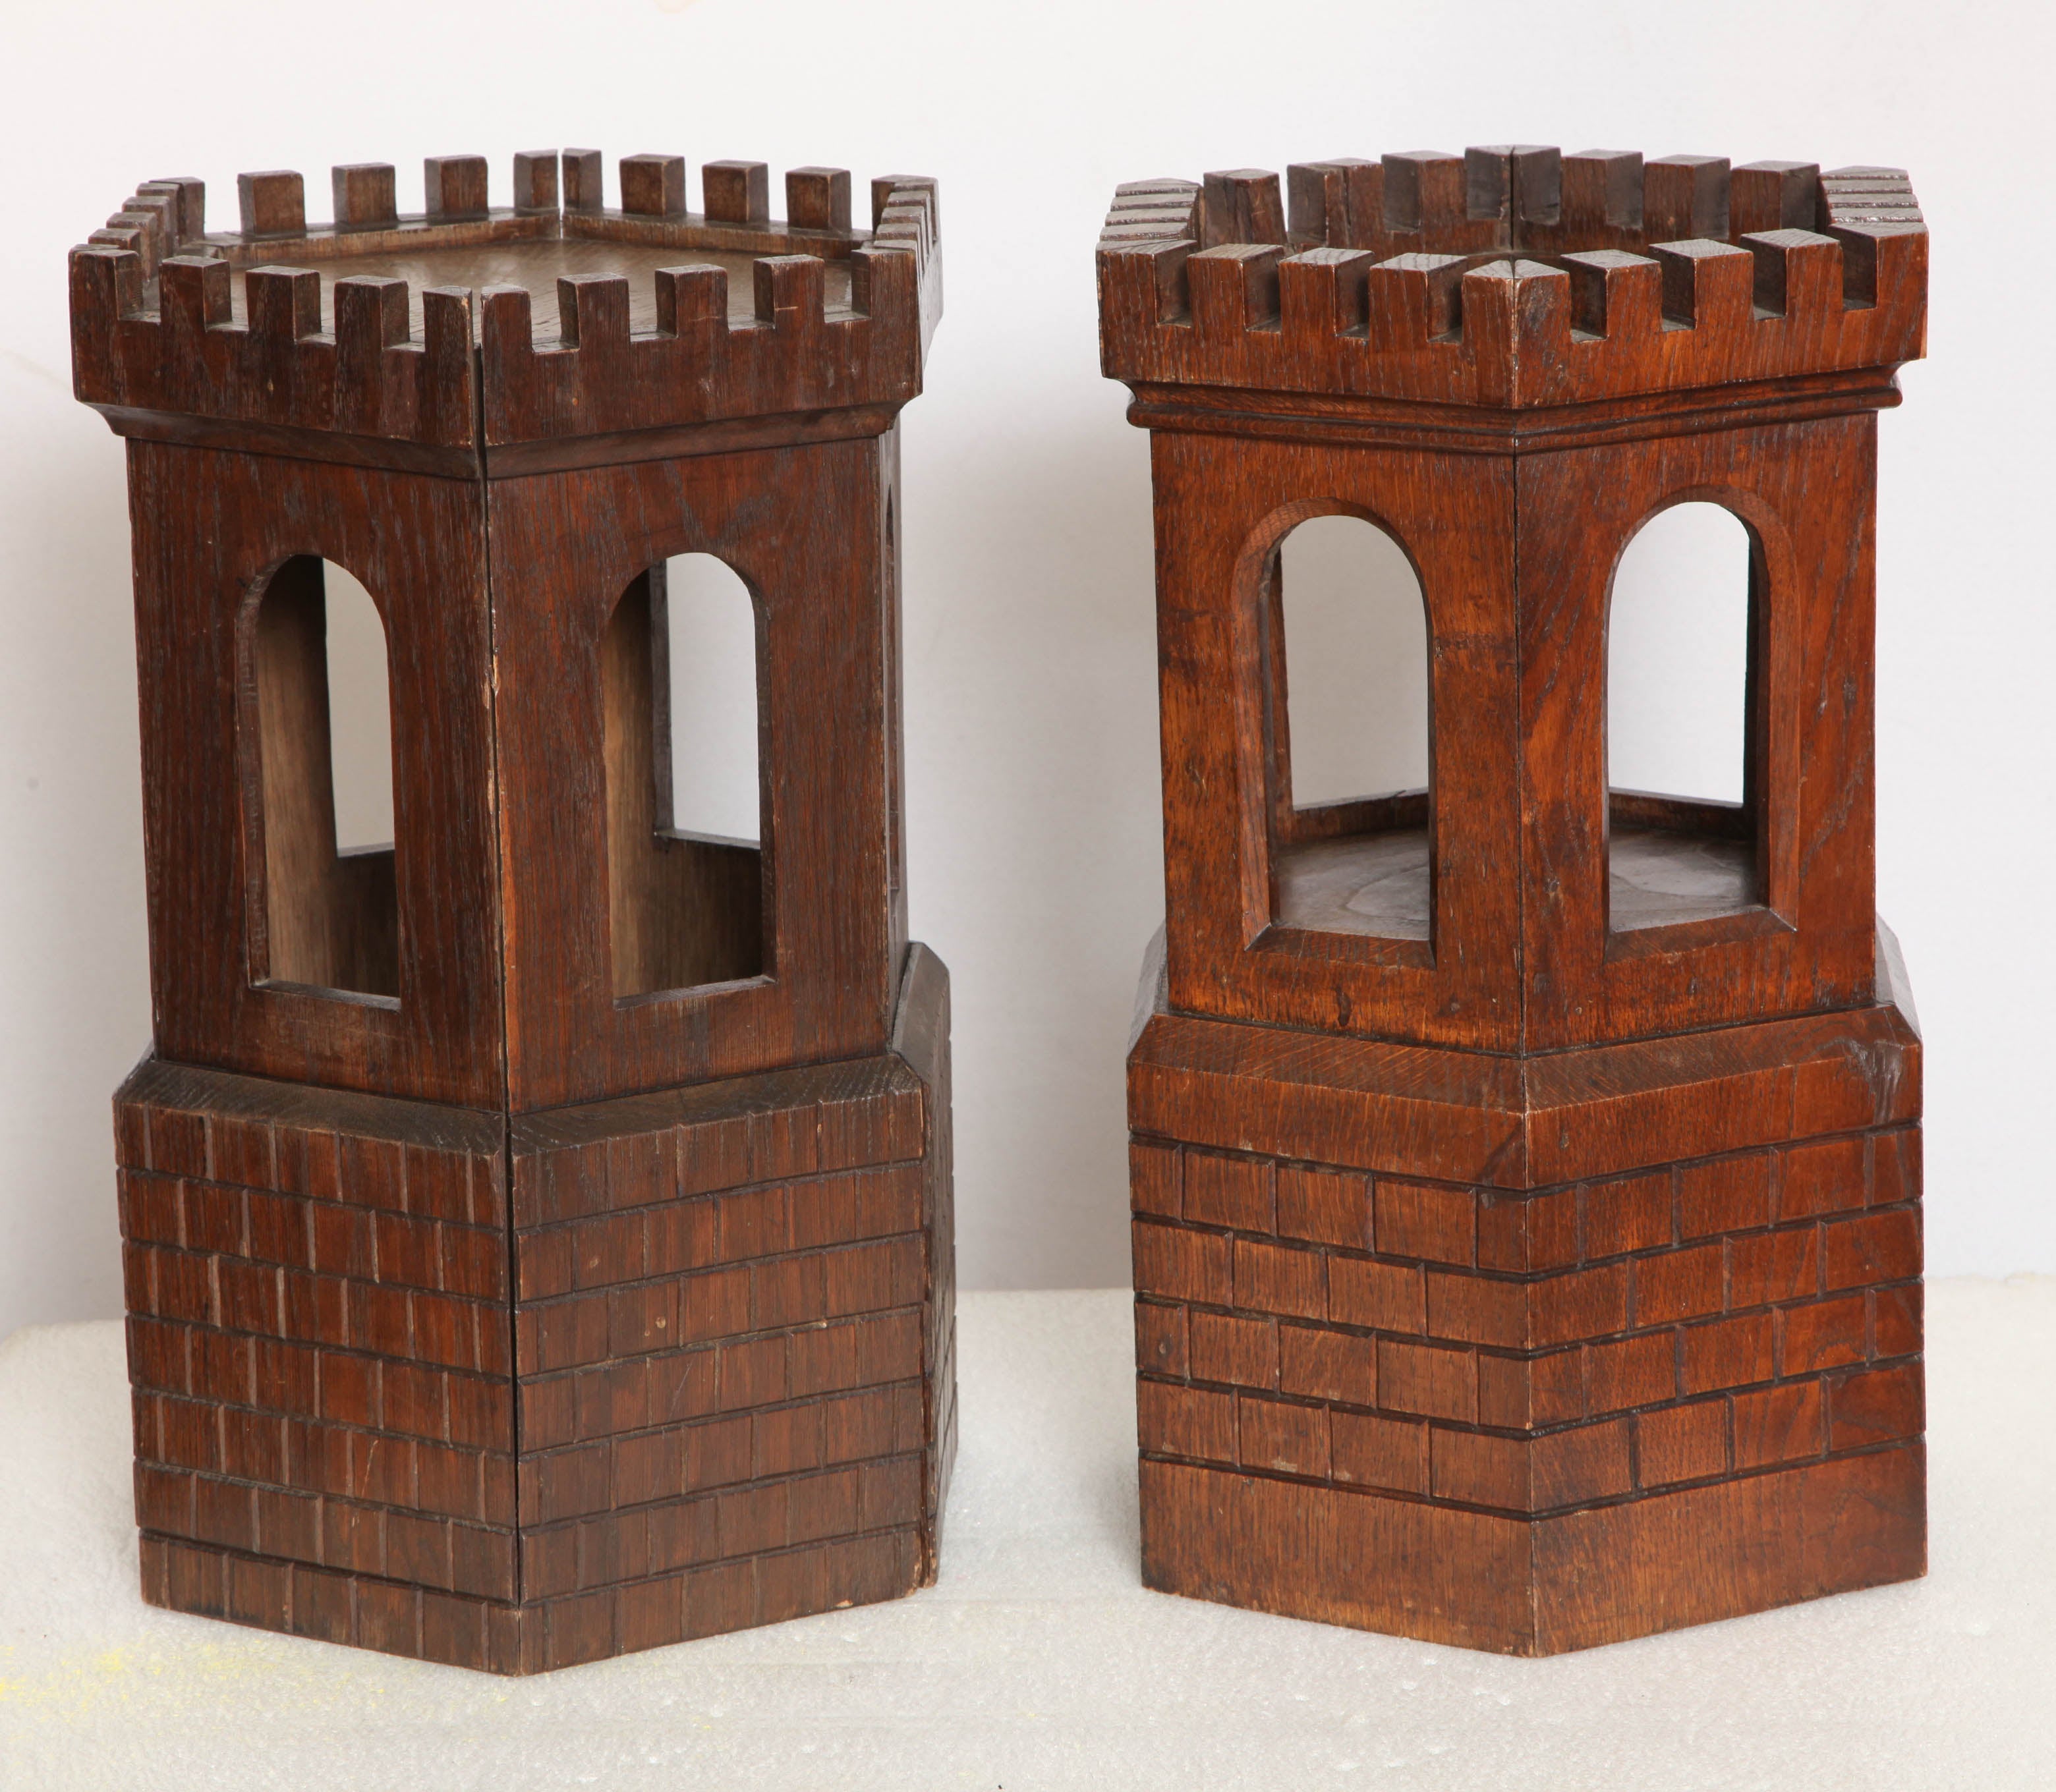 Intricately carved Oak castle models from the early Victorian era. 